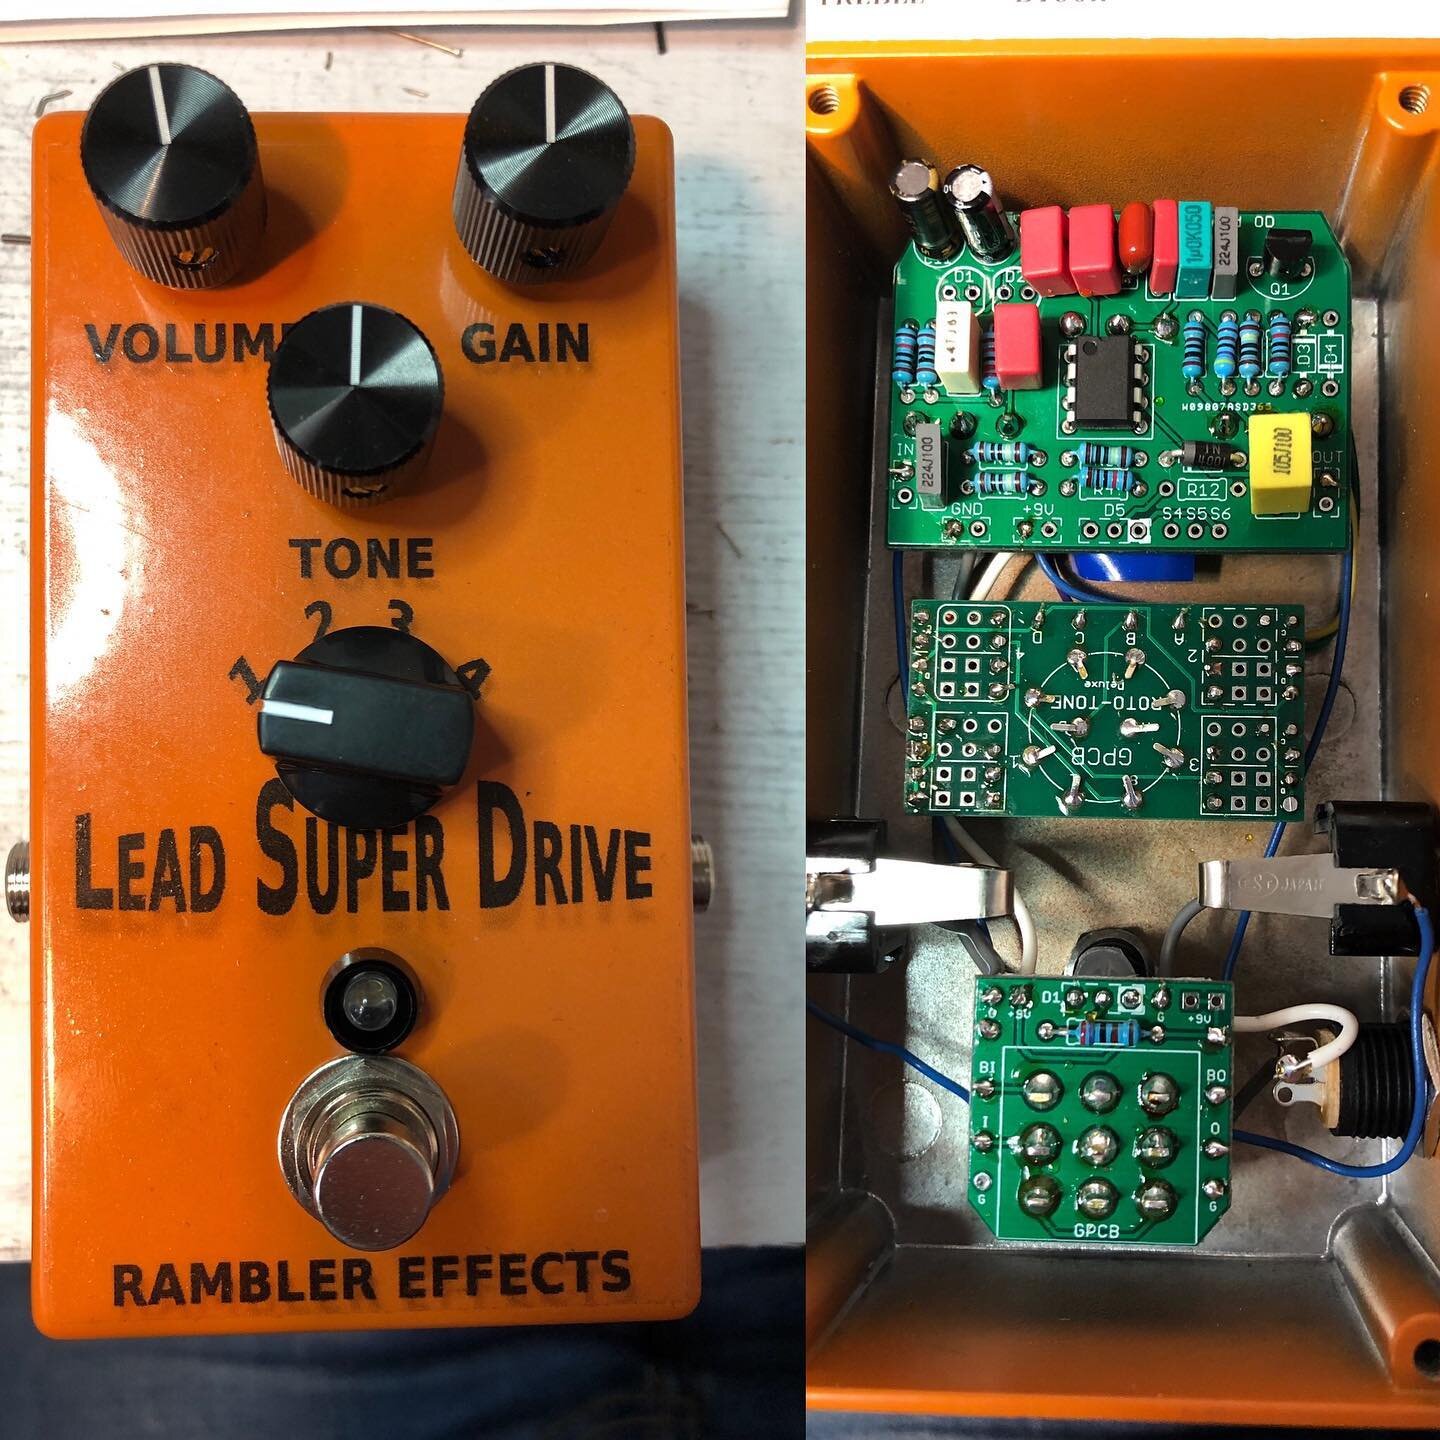 This is the Lead Super Drive.  A DSL style amp emulation circuit with 4 channels of crunchy, creamy overdrive/distortion! #handbuilteffectpedals #rocknroll #guitar #guitareffectspedal #overdrive #distortionpedal #guitarpcb #music #thesegotoeleven #gu